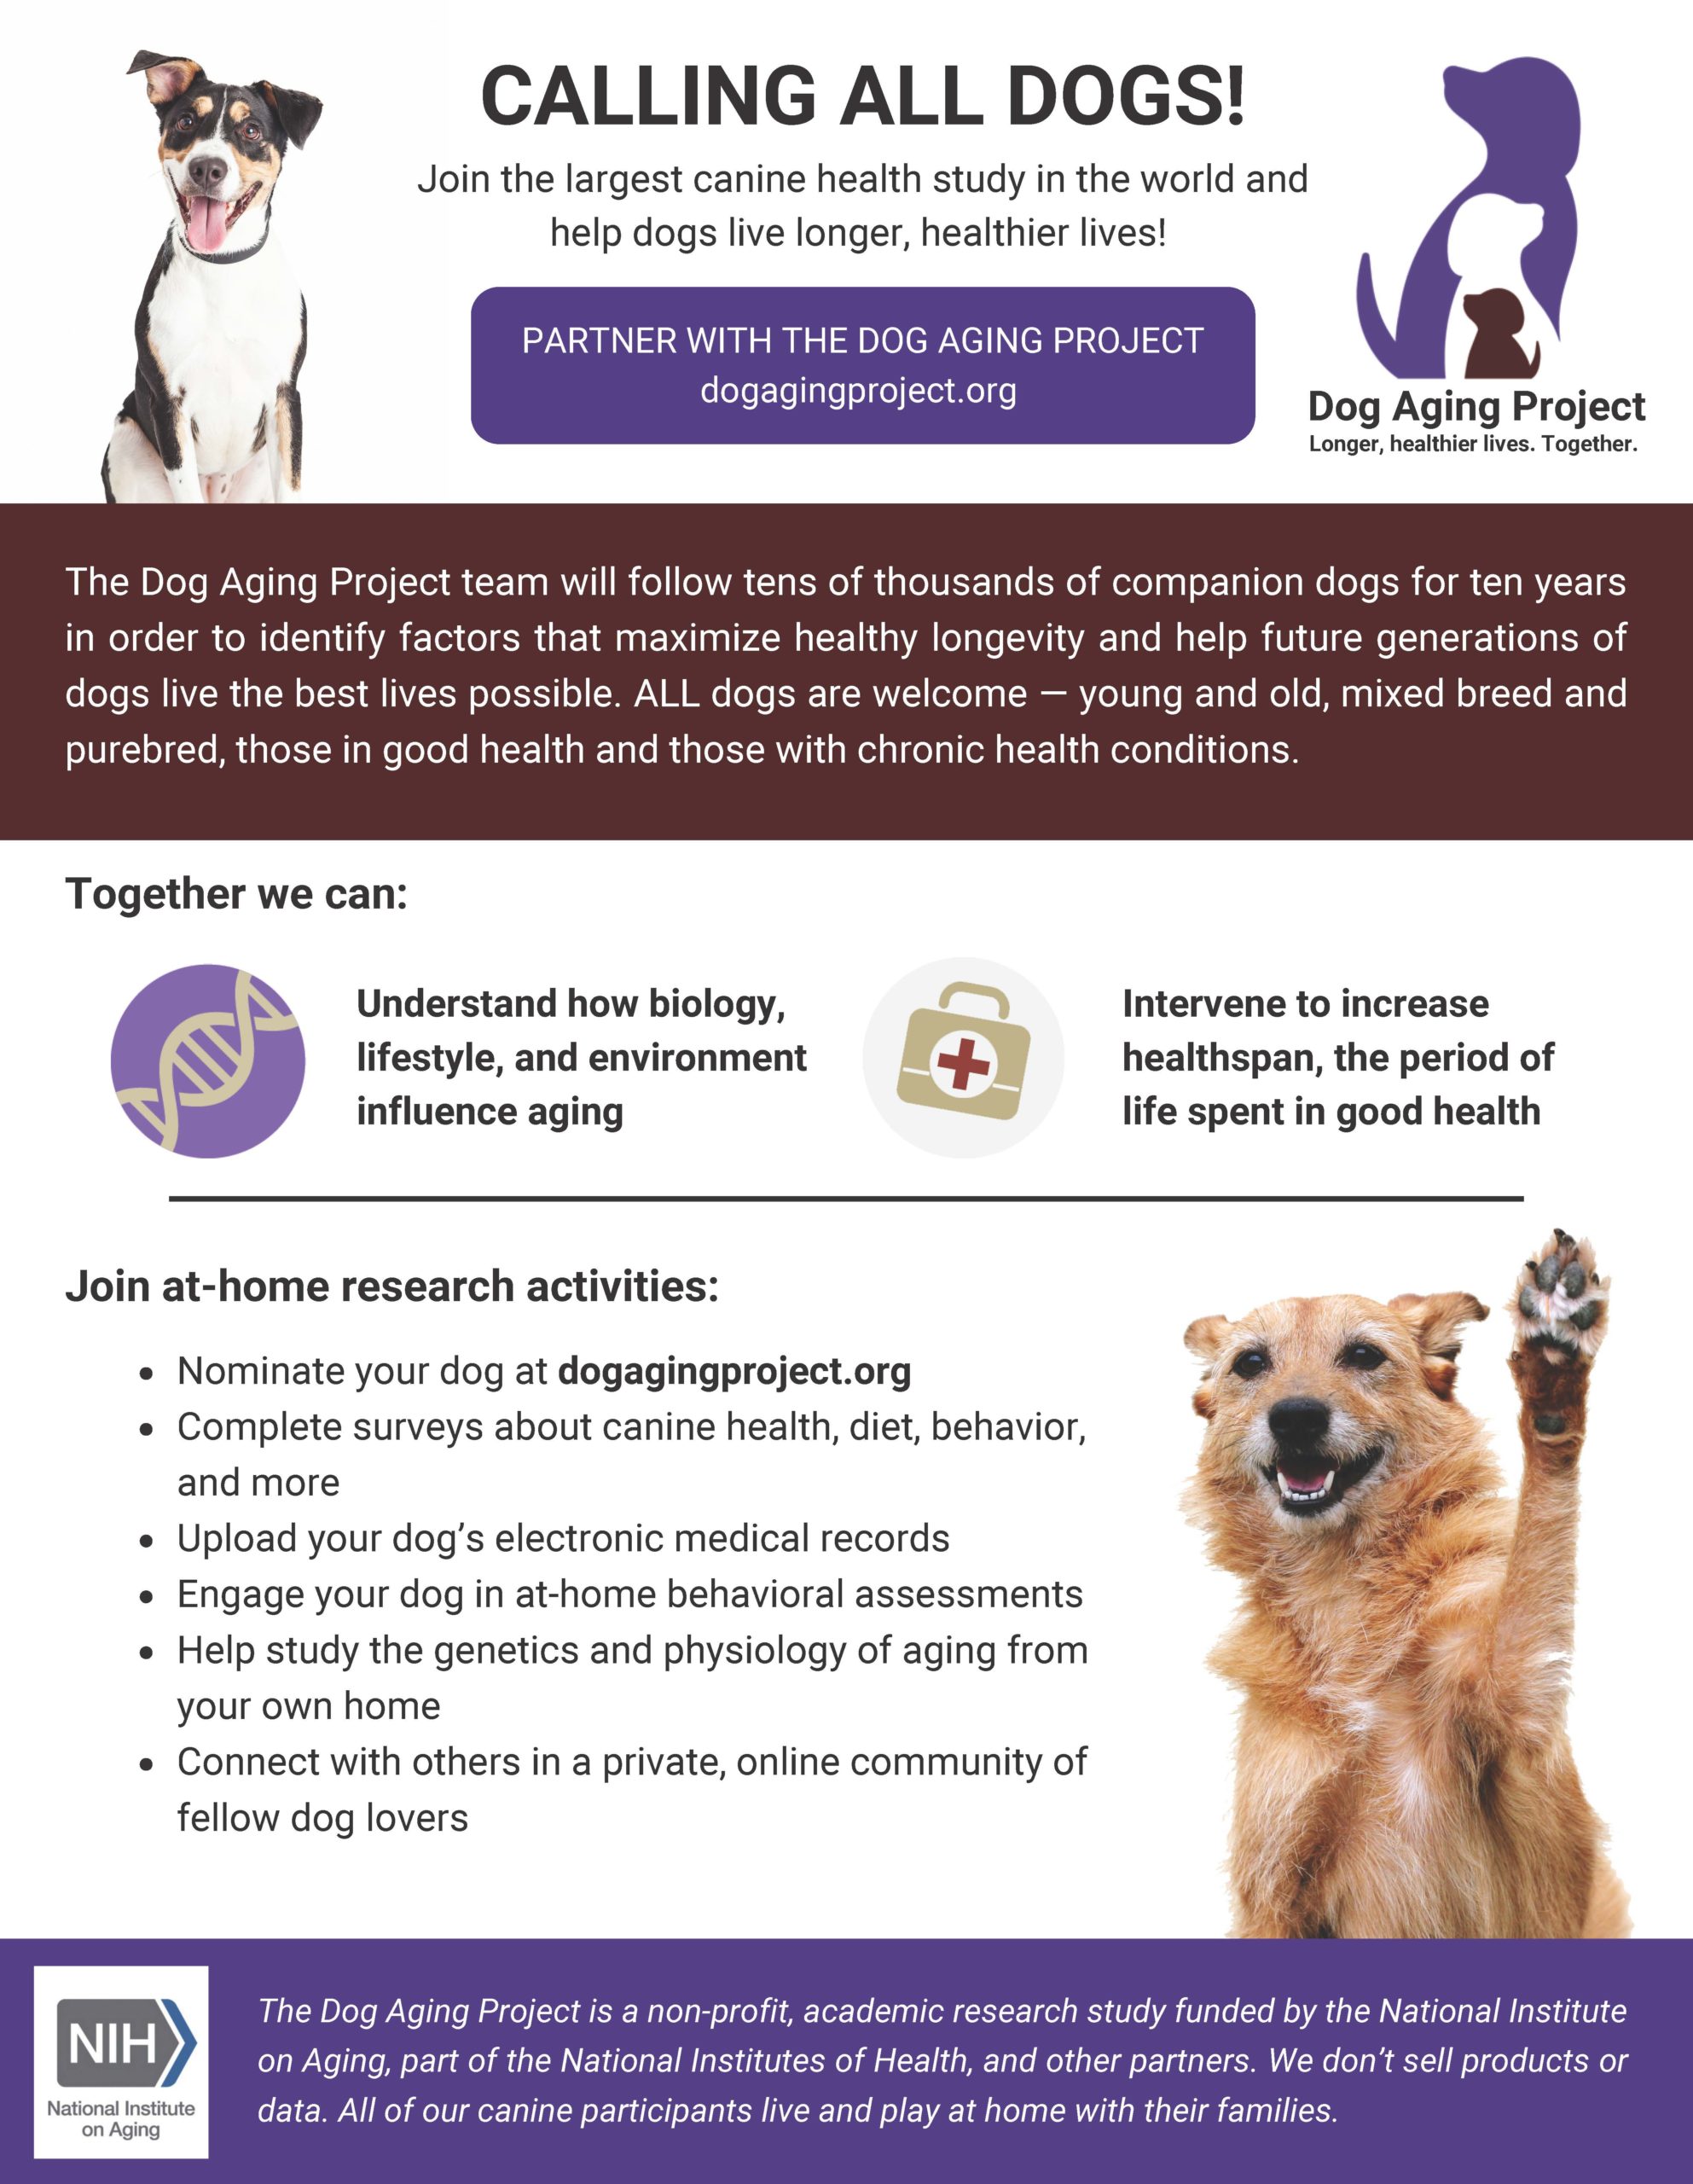 Helping dogs live longer, healthier lives